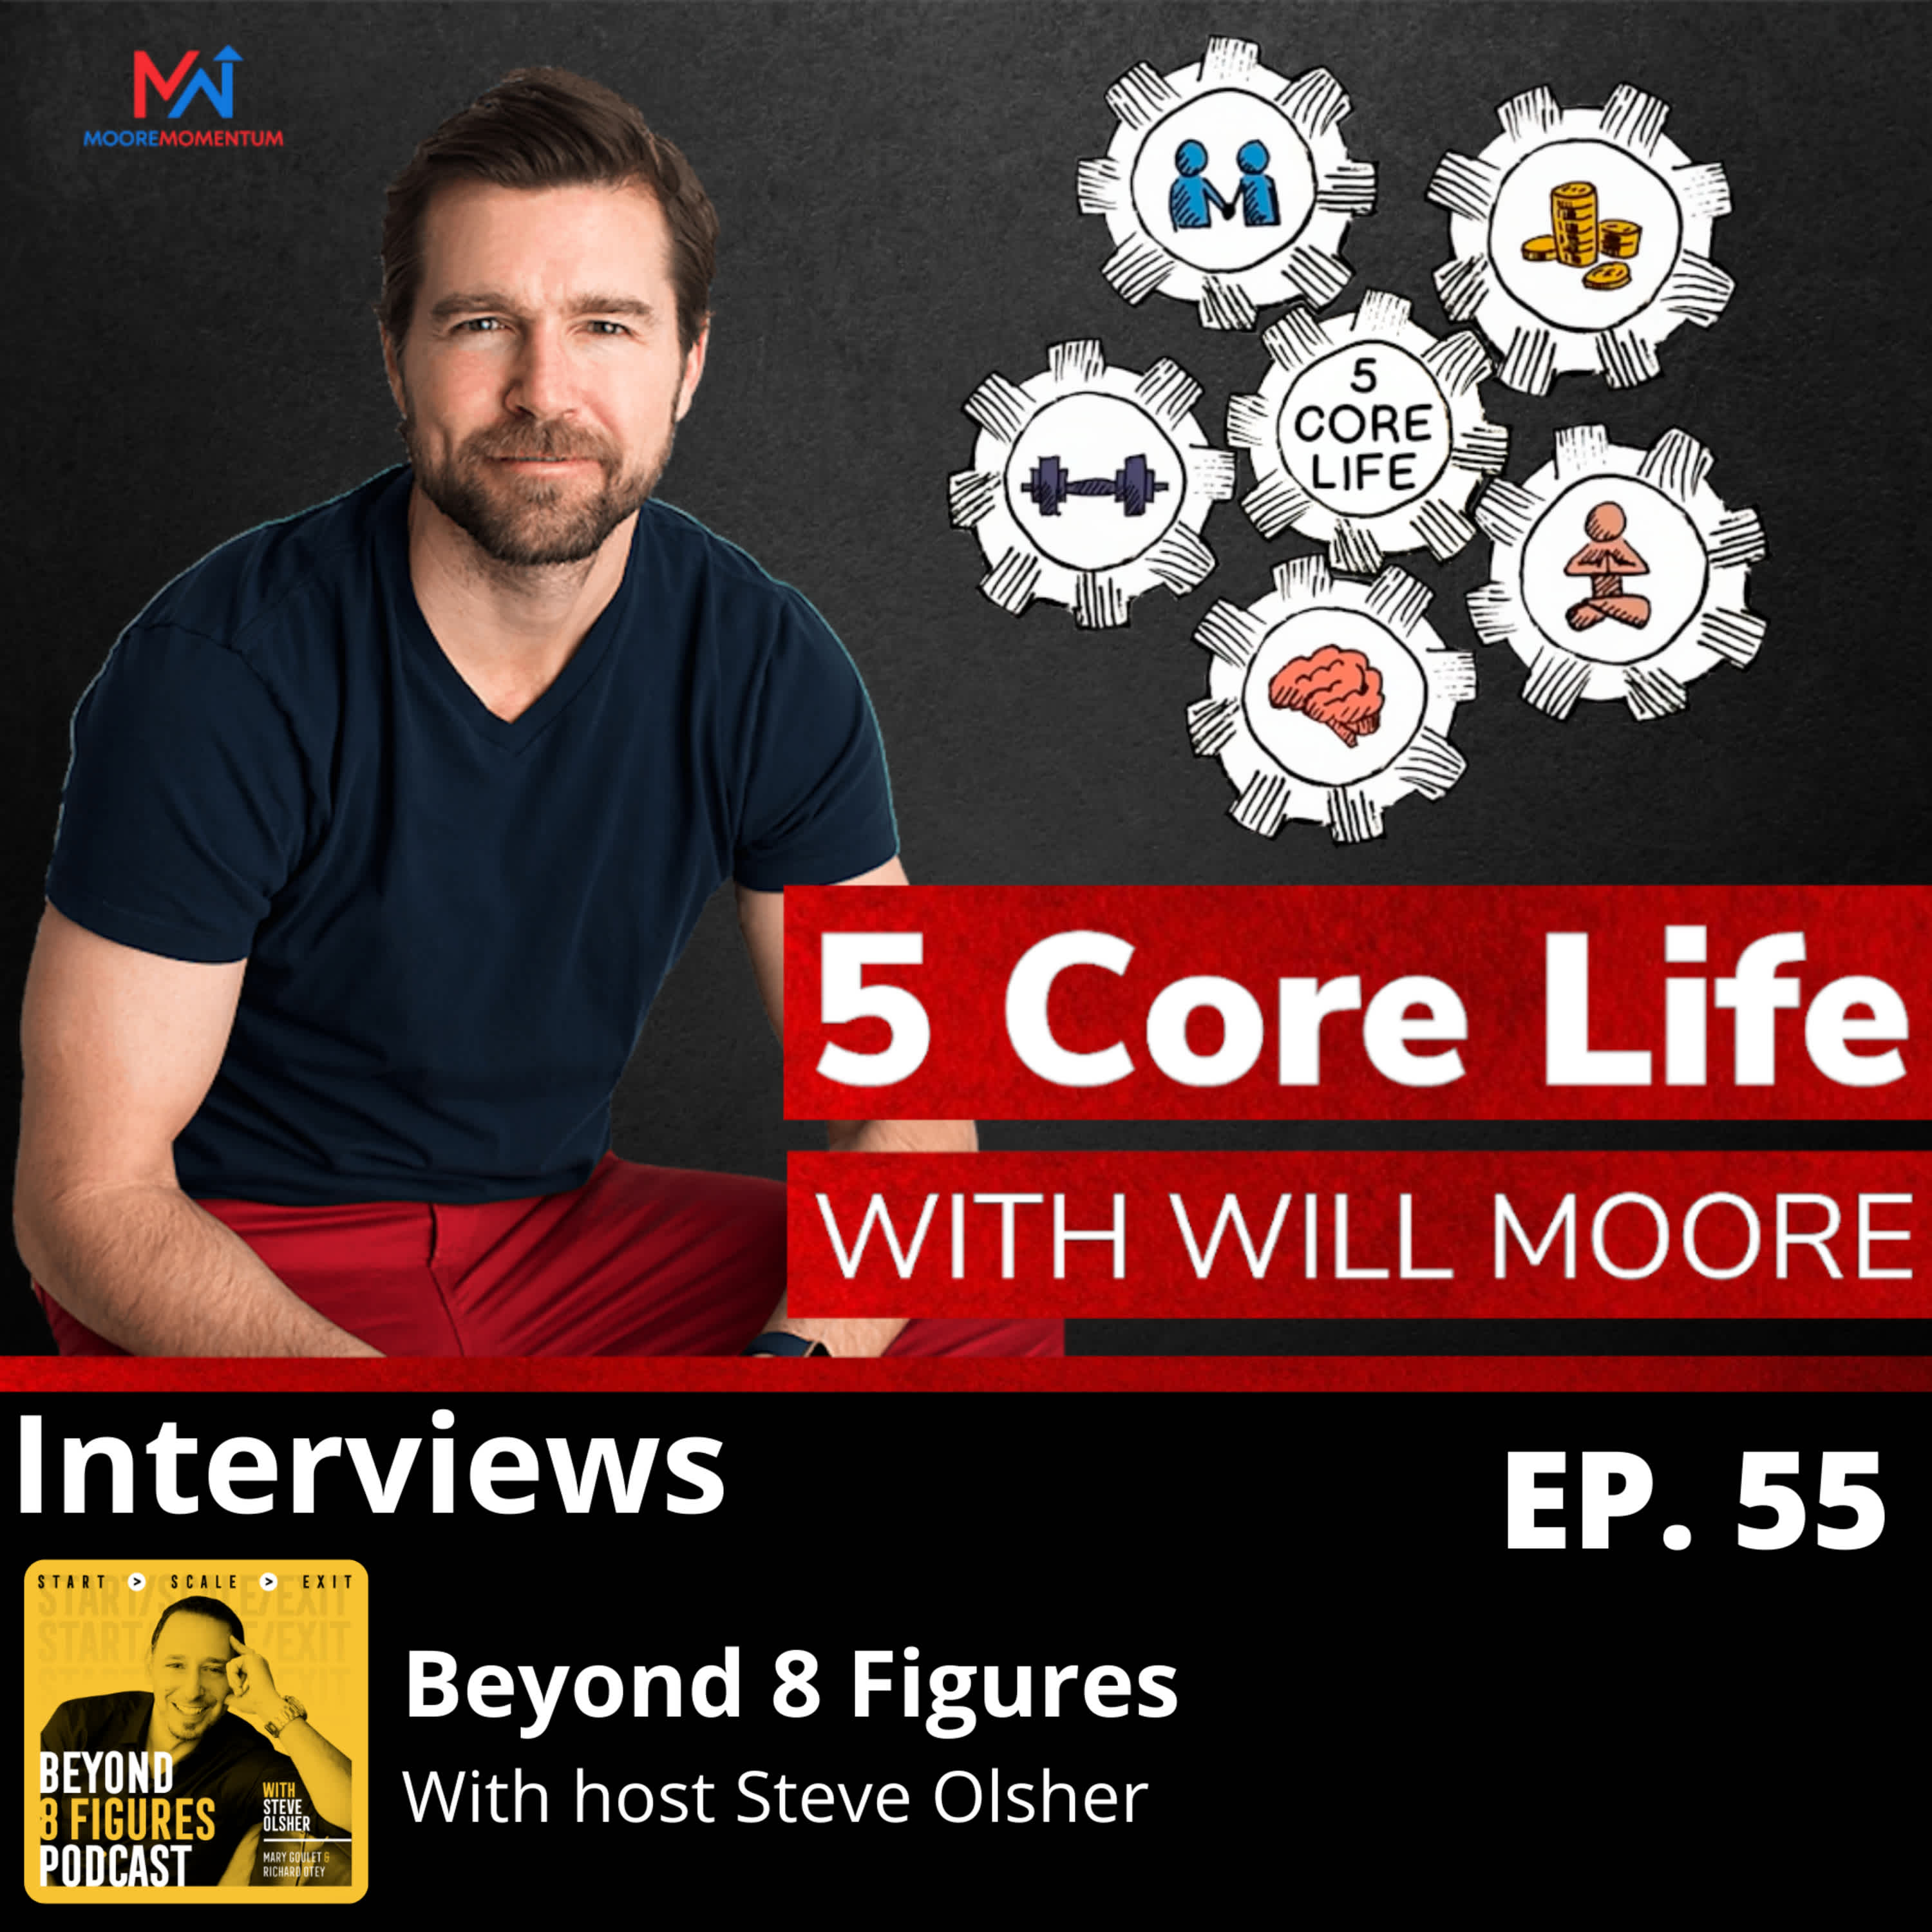 Beyond 8 Figures Podcast | $321 Million Exit from Doorstep Delivery with Will Moore